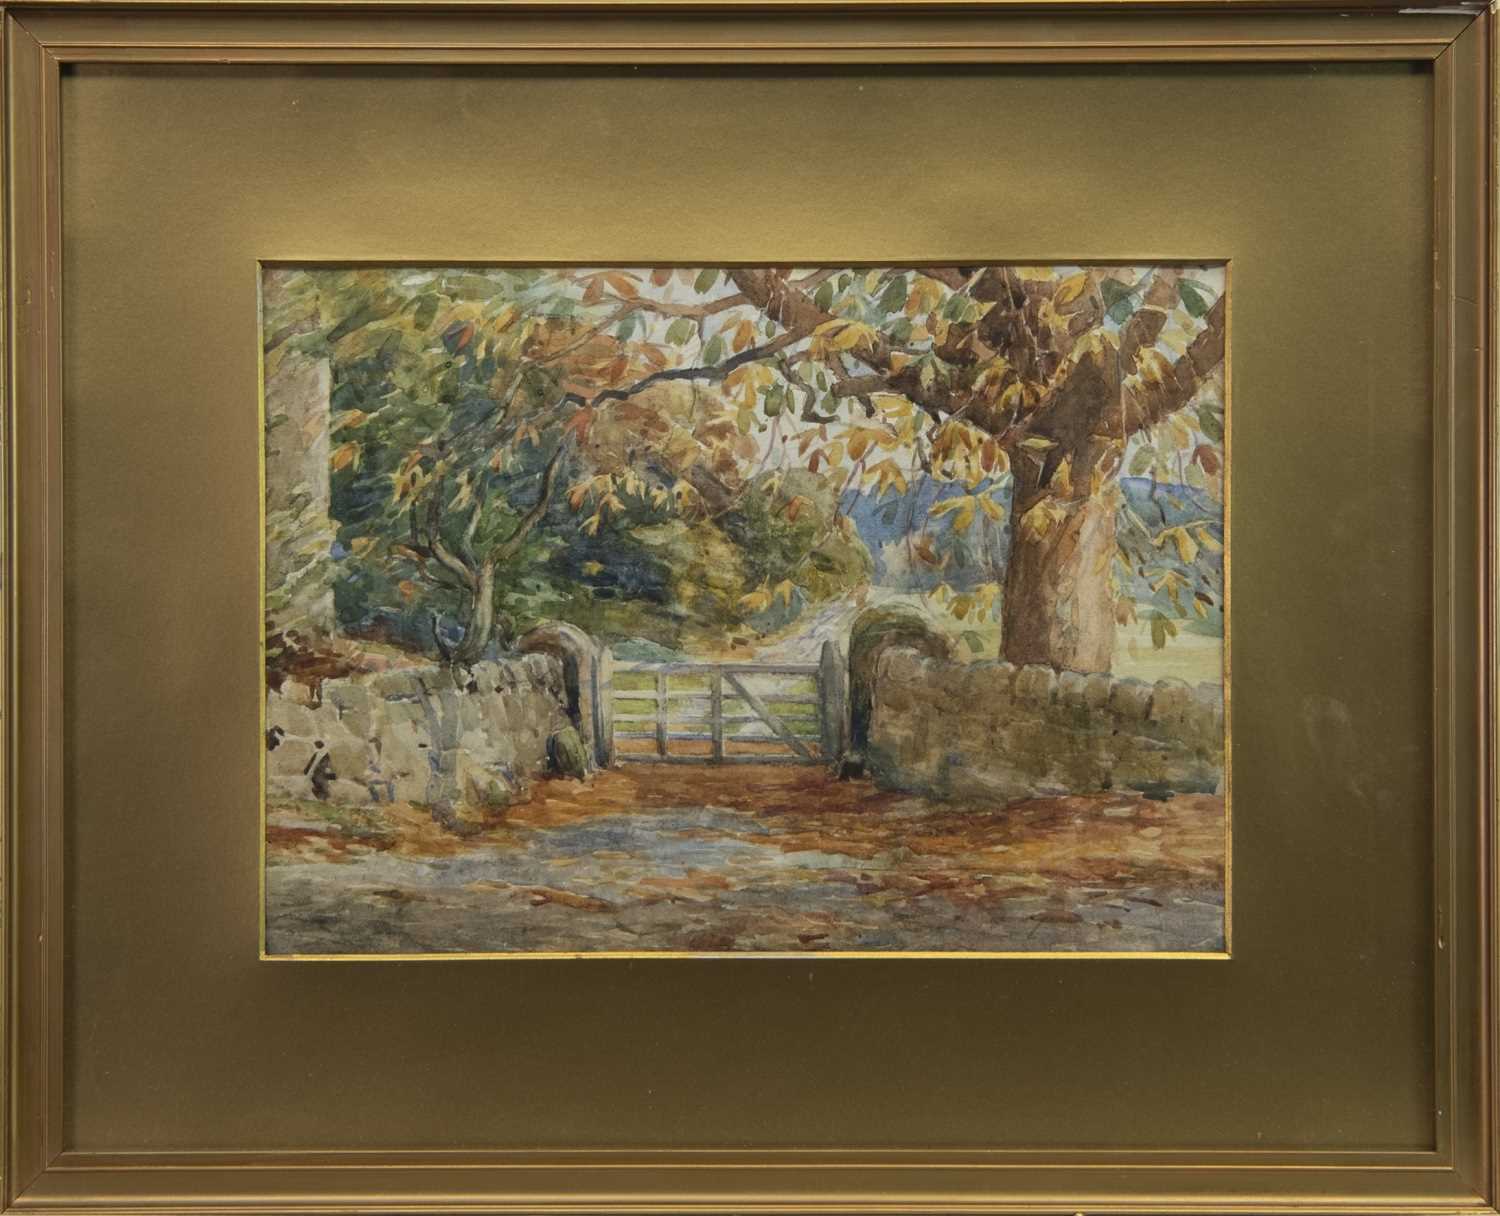 Lot 423 - AUTUMNAL SCENE, A WATERCOLOUR BY FRANCIS PATRICK MARTIN